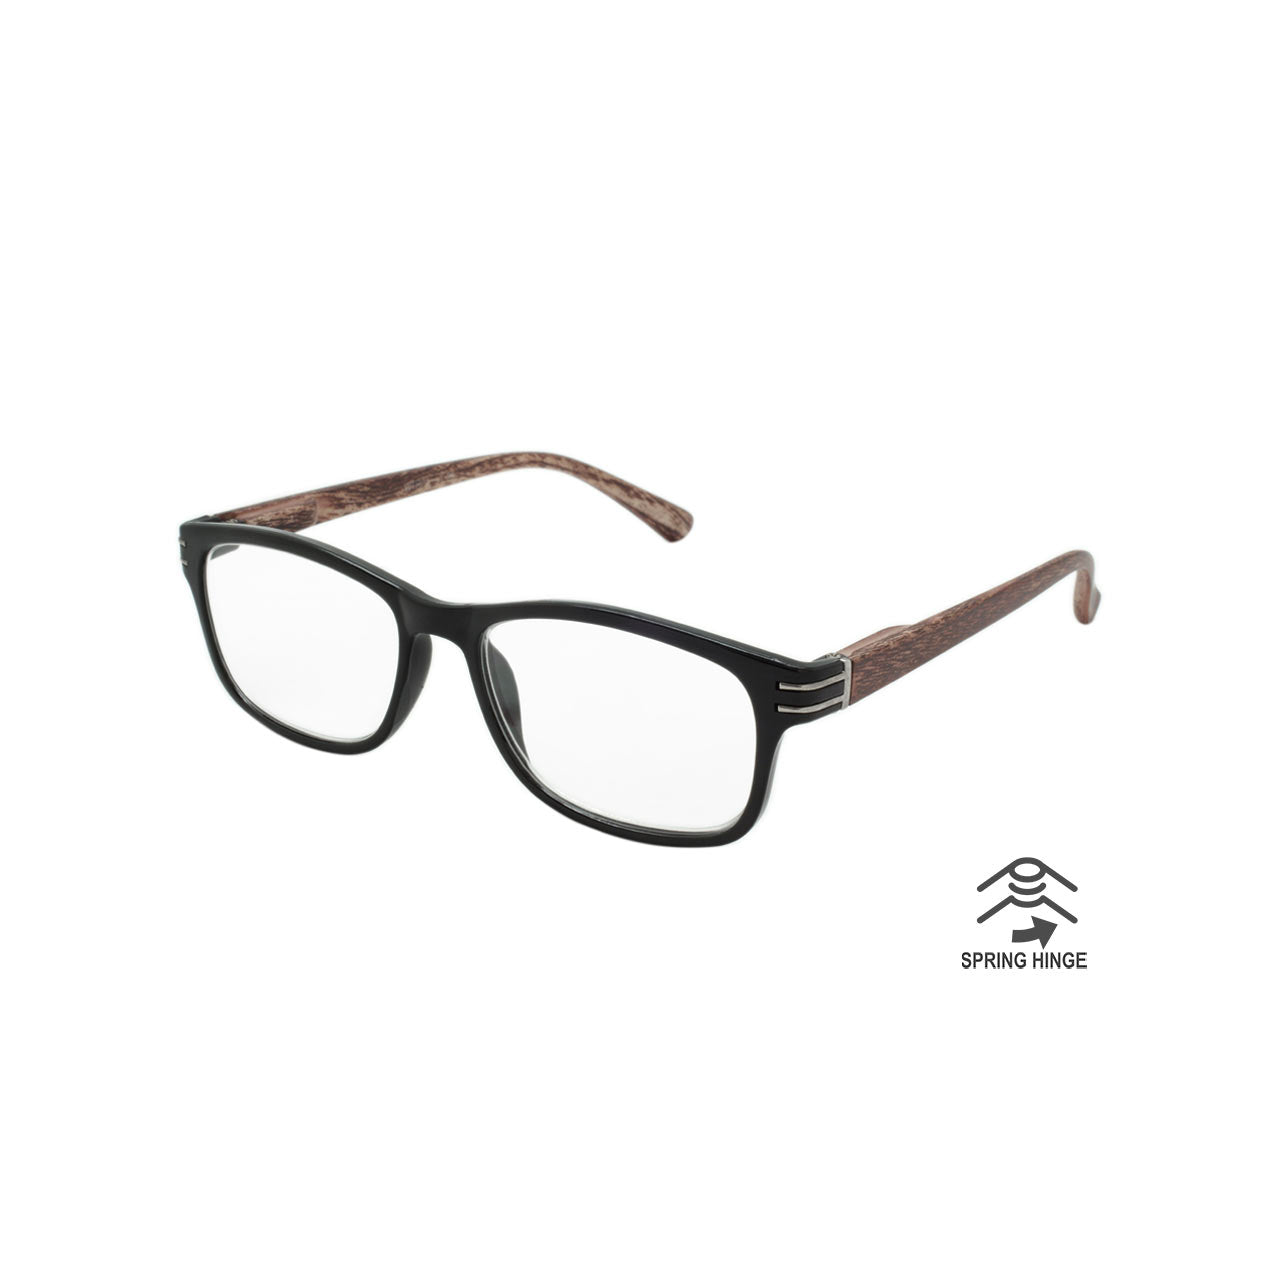 Woodtone Spring Hinge Reader - Cheaters - Reading Glasses - Black Frame with Silver Metal, Brown Wood like Temple - Mellow Monkey